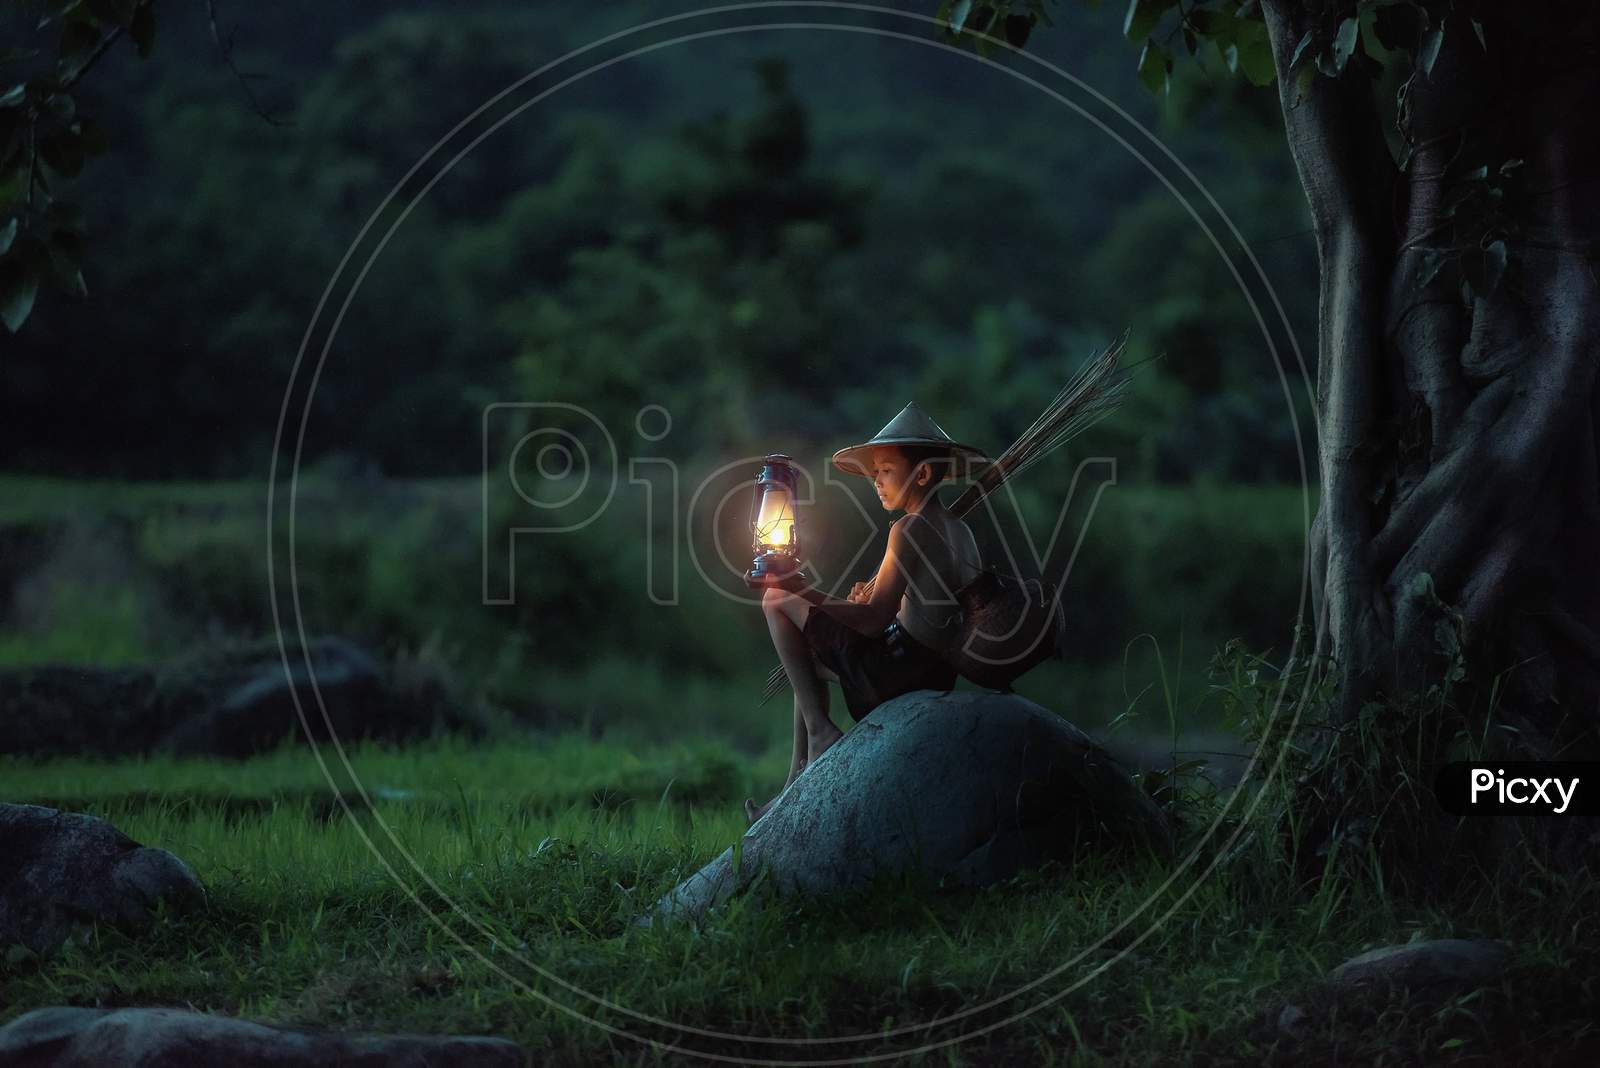 A little boy sitting with a lamp